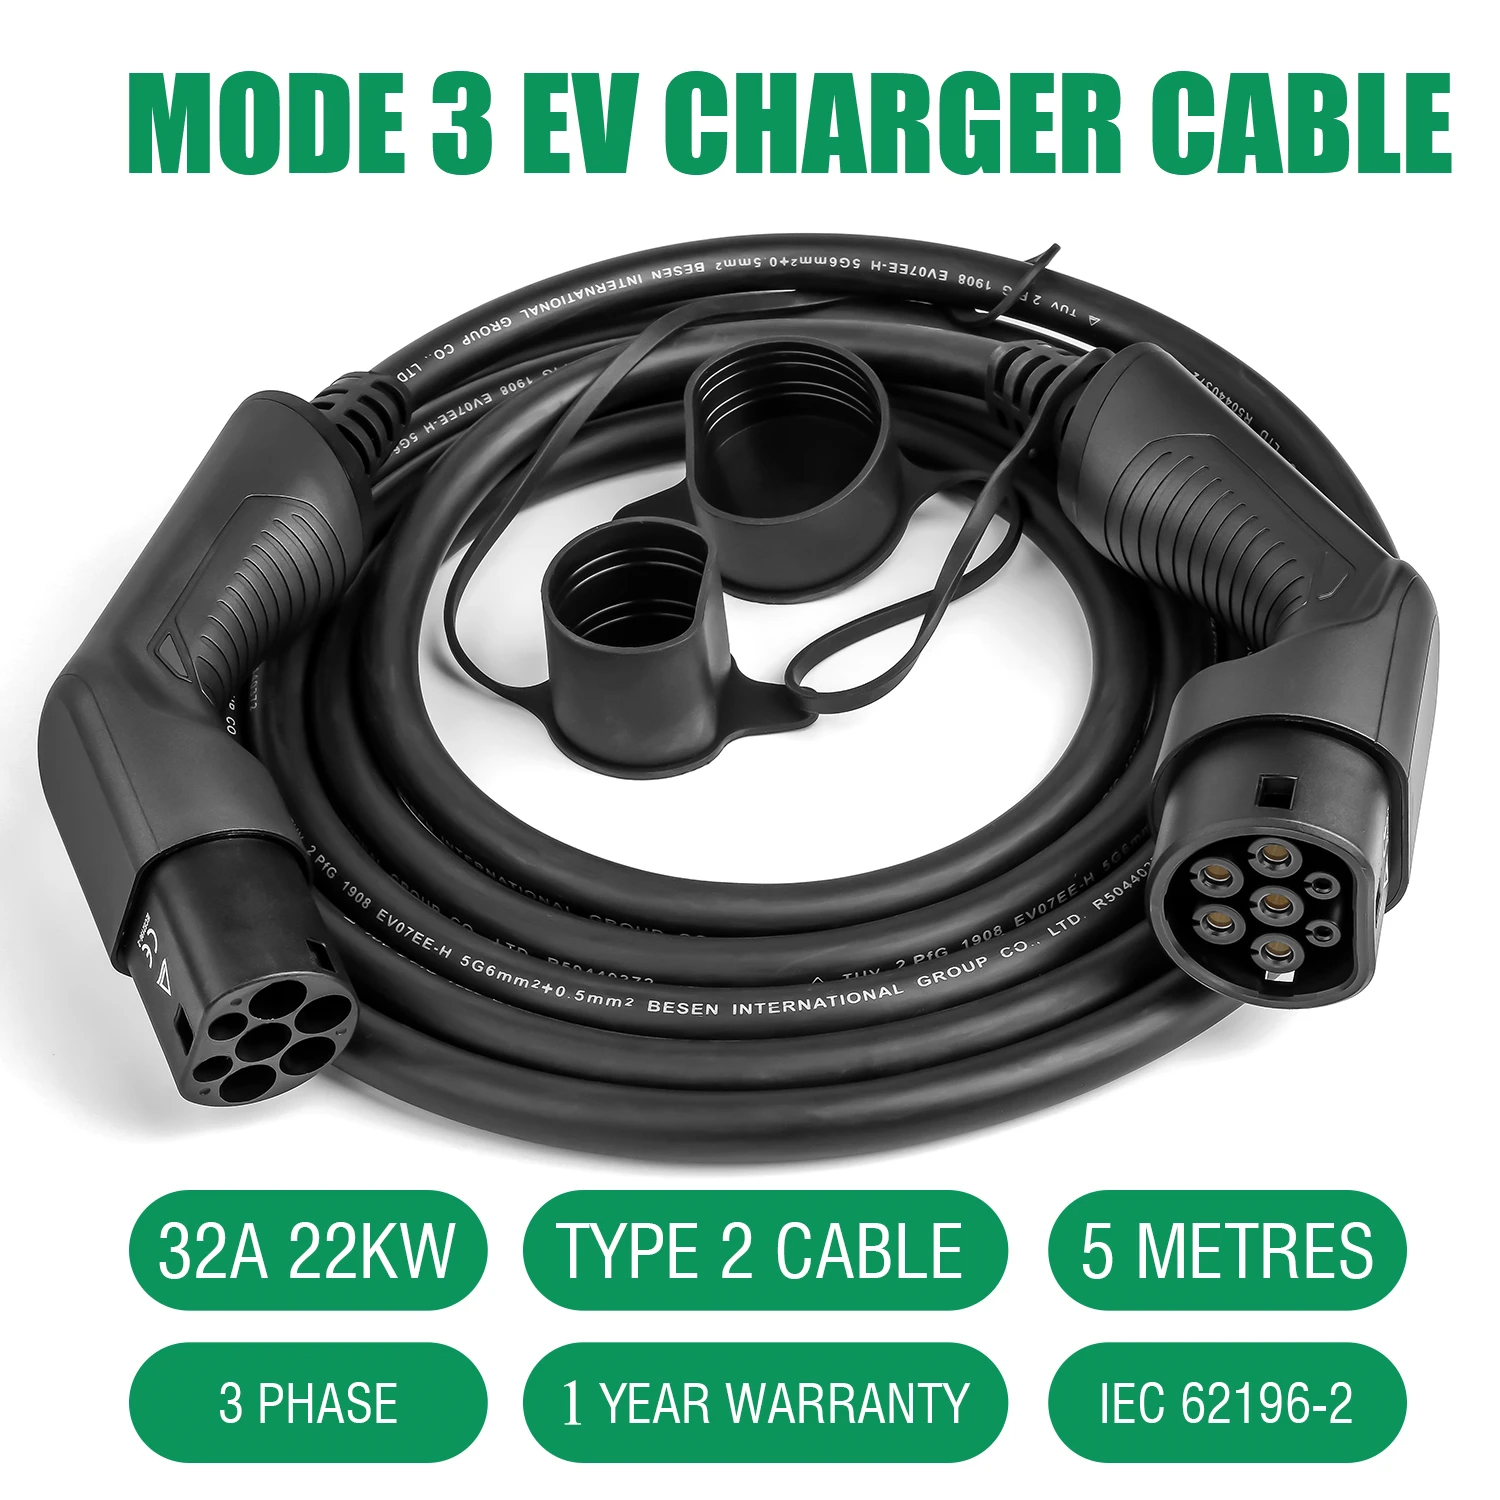 EV Charging Cable 32A 22KW Three Phase Electric Vehicle Cord for Car Charger Station Type 2 EVSE Female to Male Plug IEC 62196